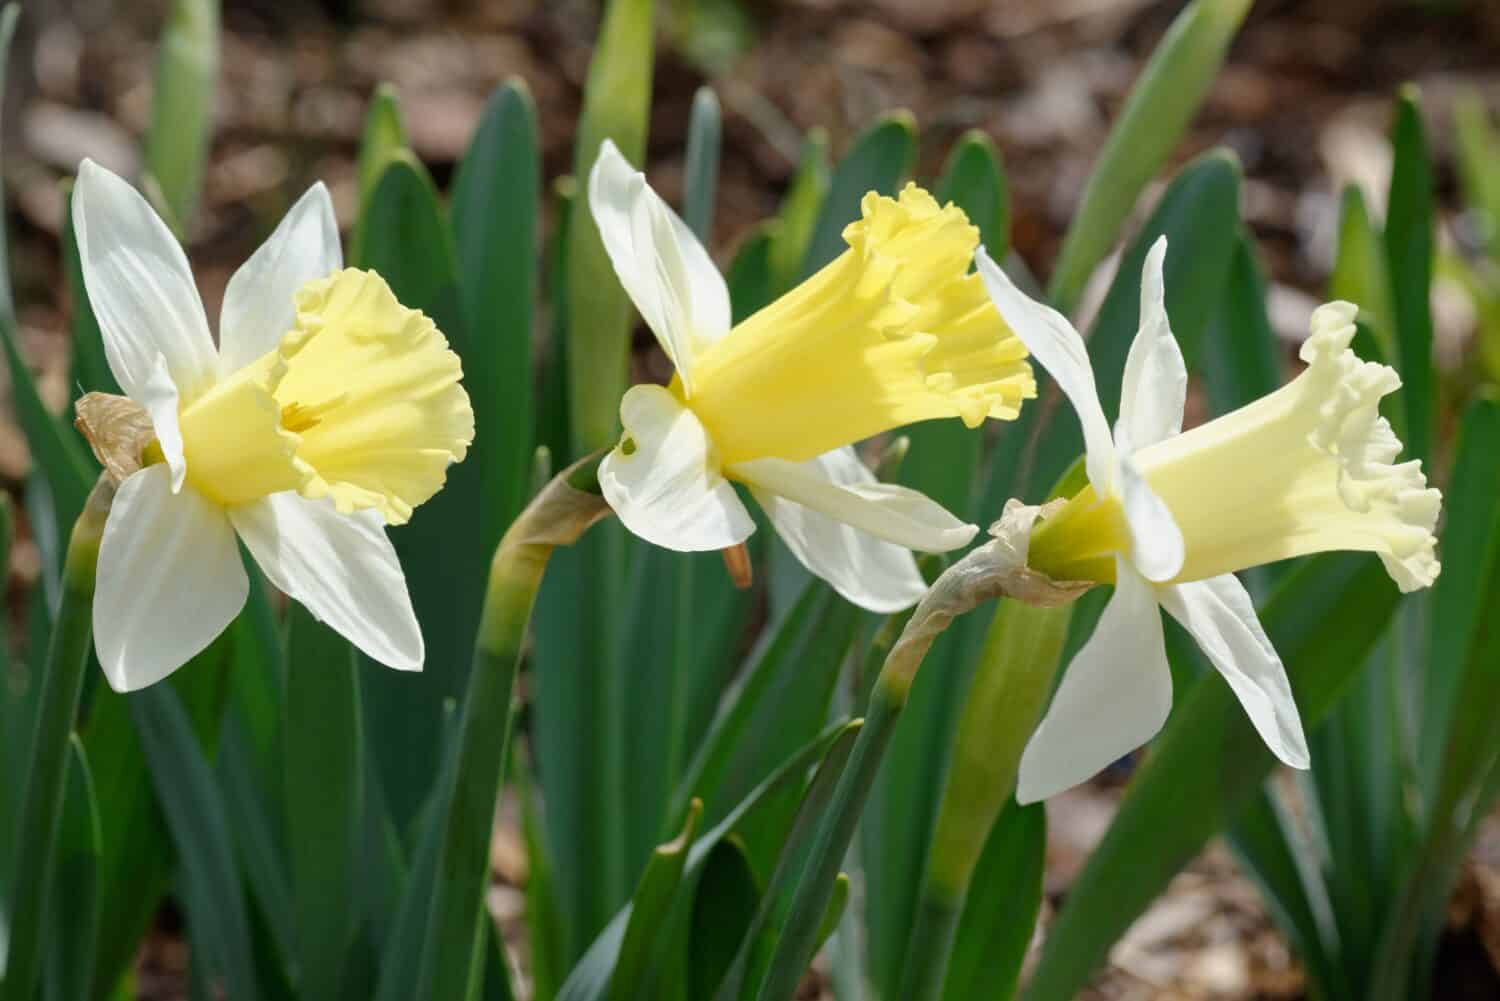 Narcissus 'Broughshane' is a daffodil in Division 1 (Trumpet daffodil) with white crown and yellow trumpet